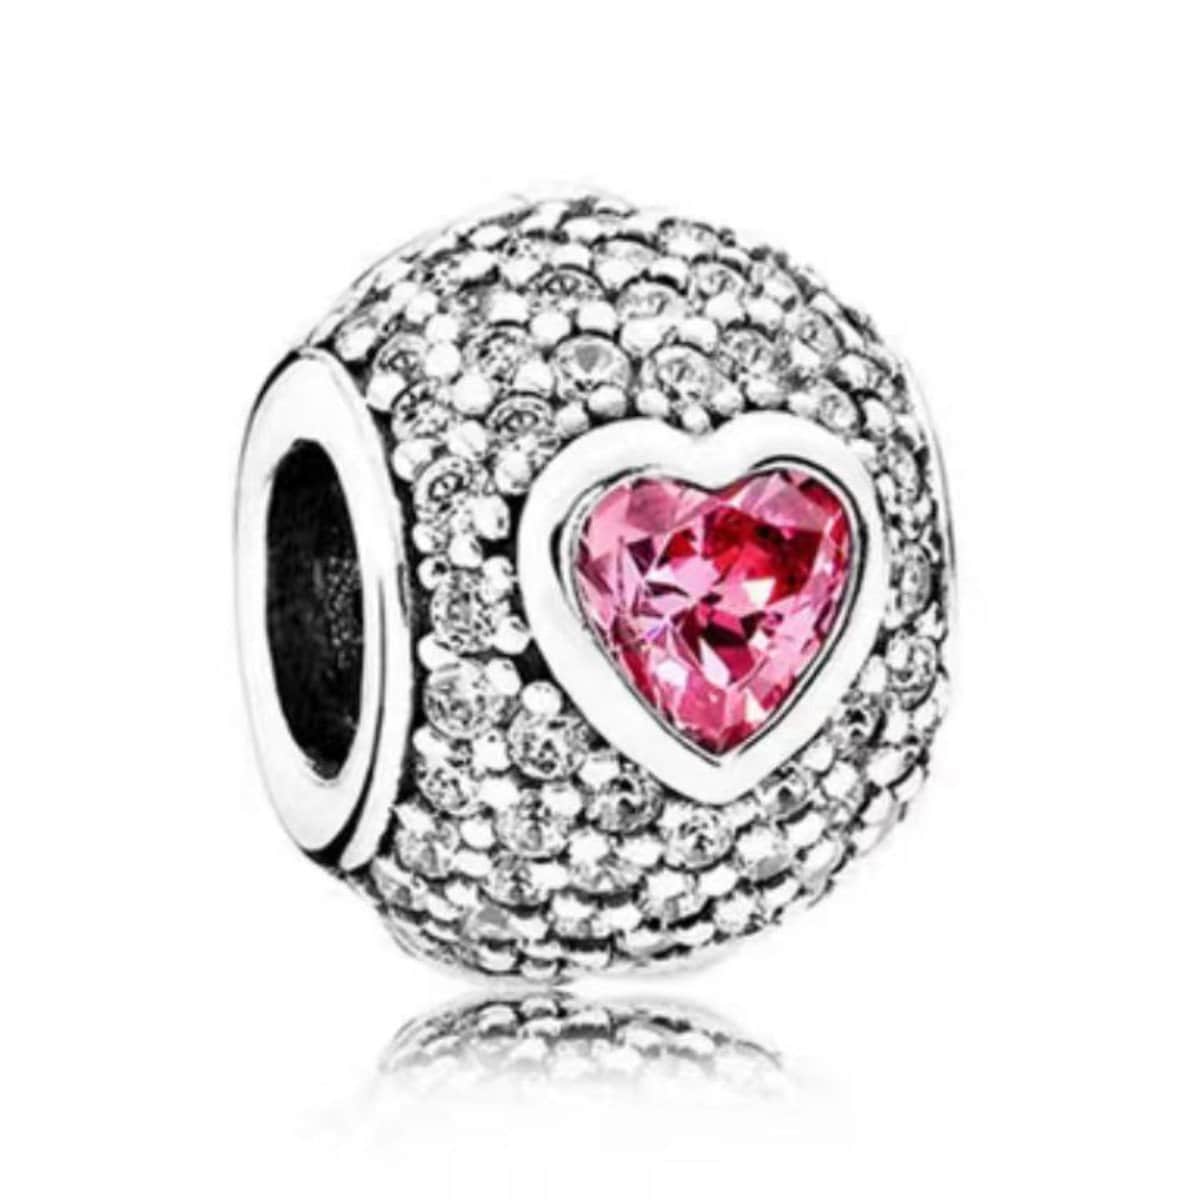 Pink Heart 2 PC Magnetic Sterling Silver & Crystals Bead Charm by The Black Bow Jewelry Co.